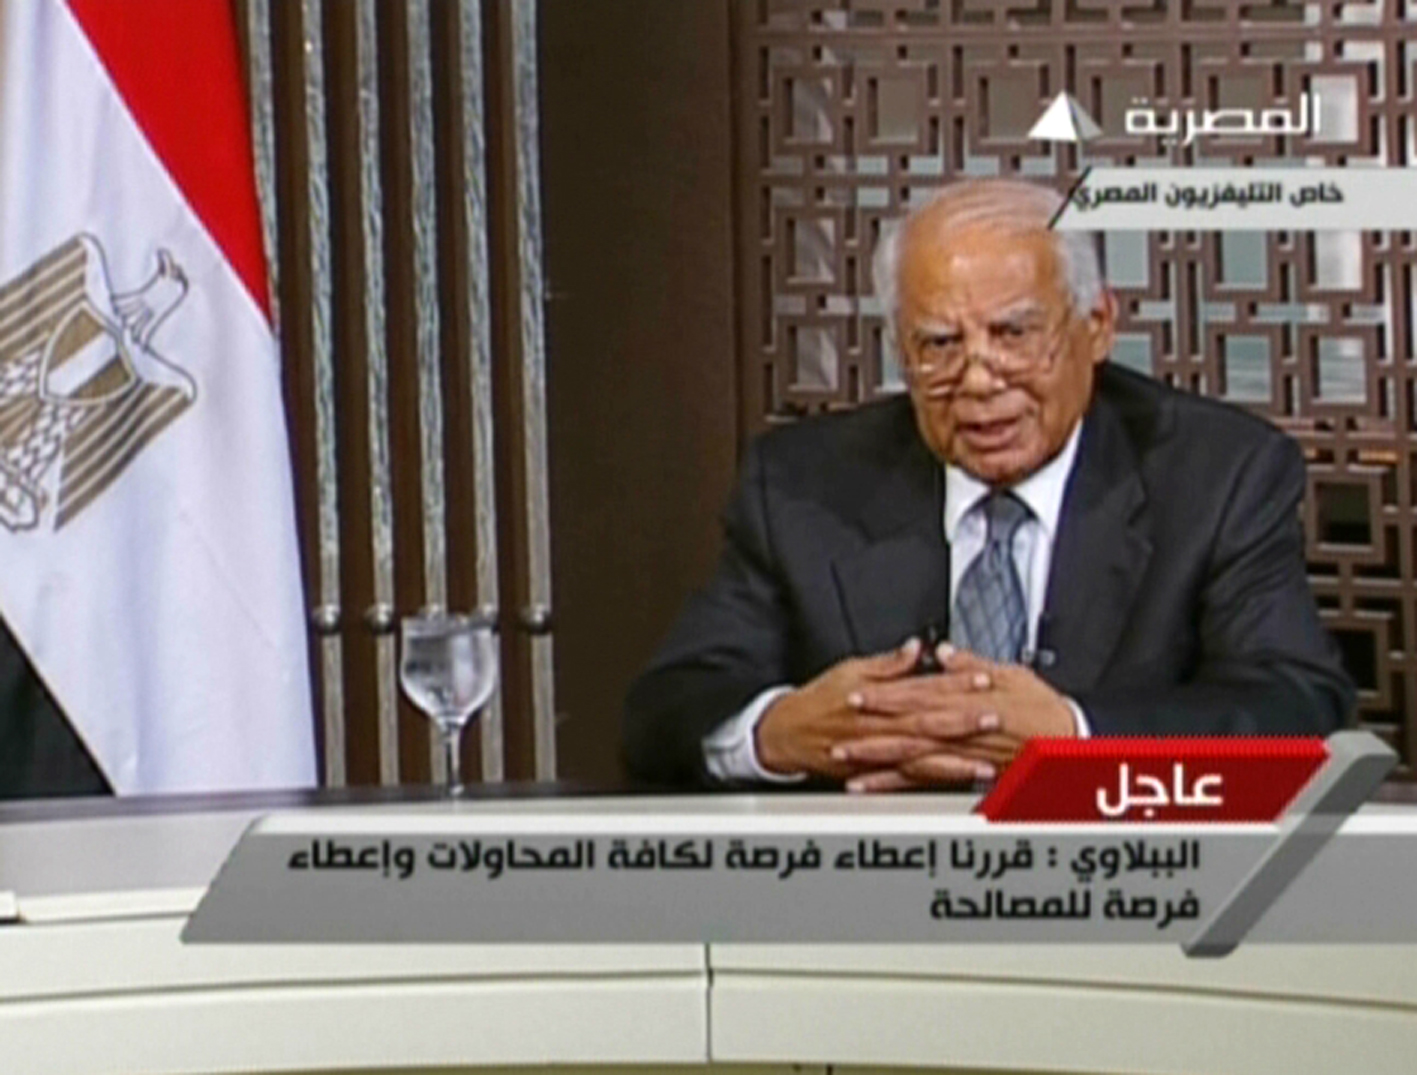 Screen grab from Egyptian state television shows Egypt's interim prime minister Hazem al-Beblawi. Photo: AFP